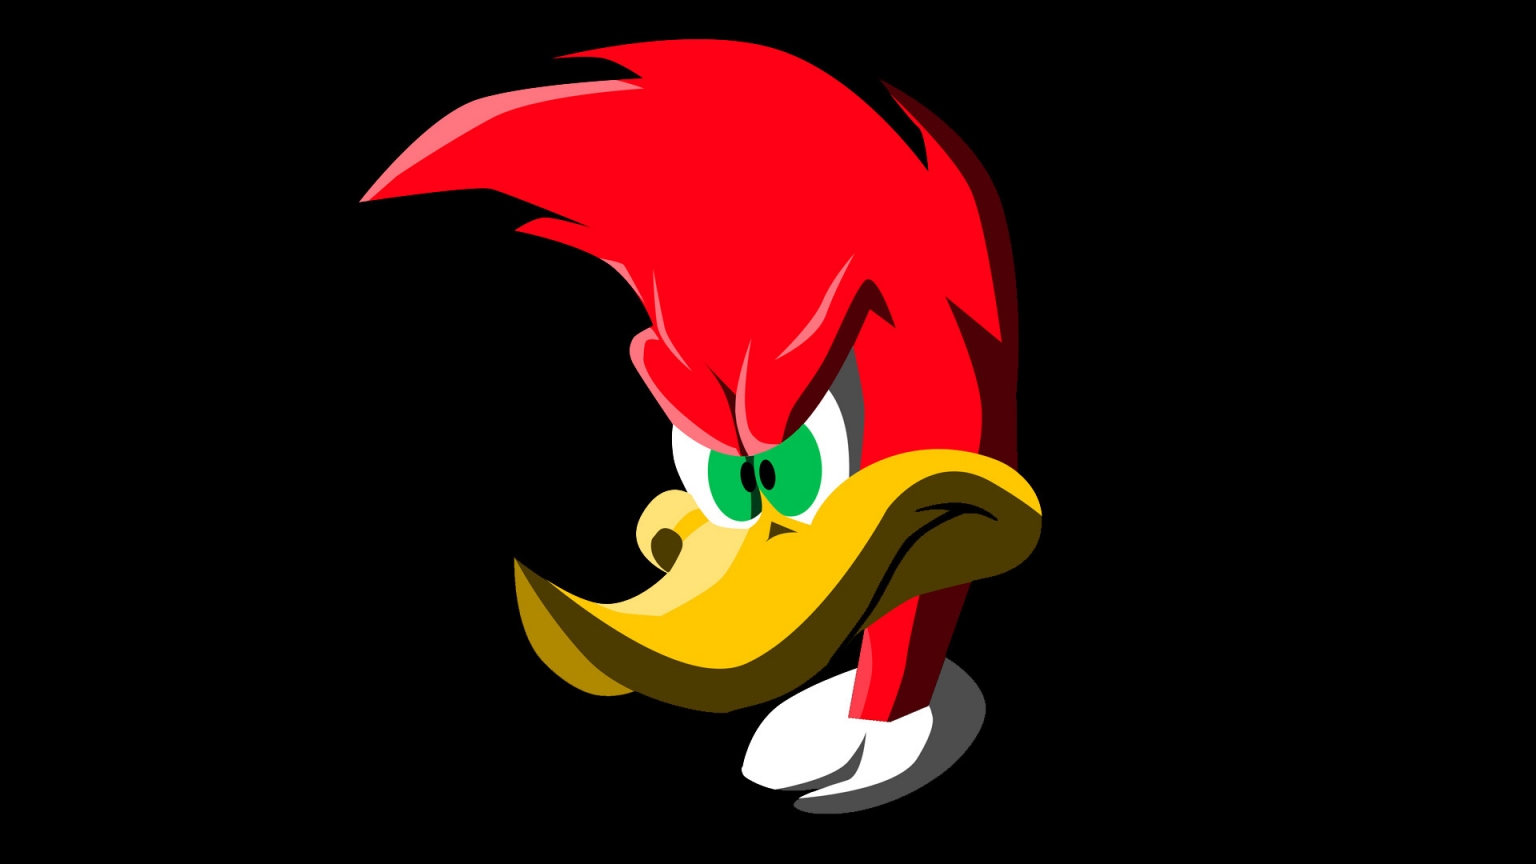 Woody Woodpecker for 1536 x 864 HDTV resolution